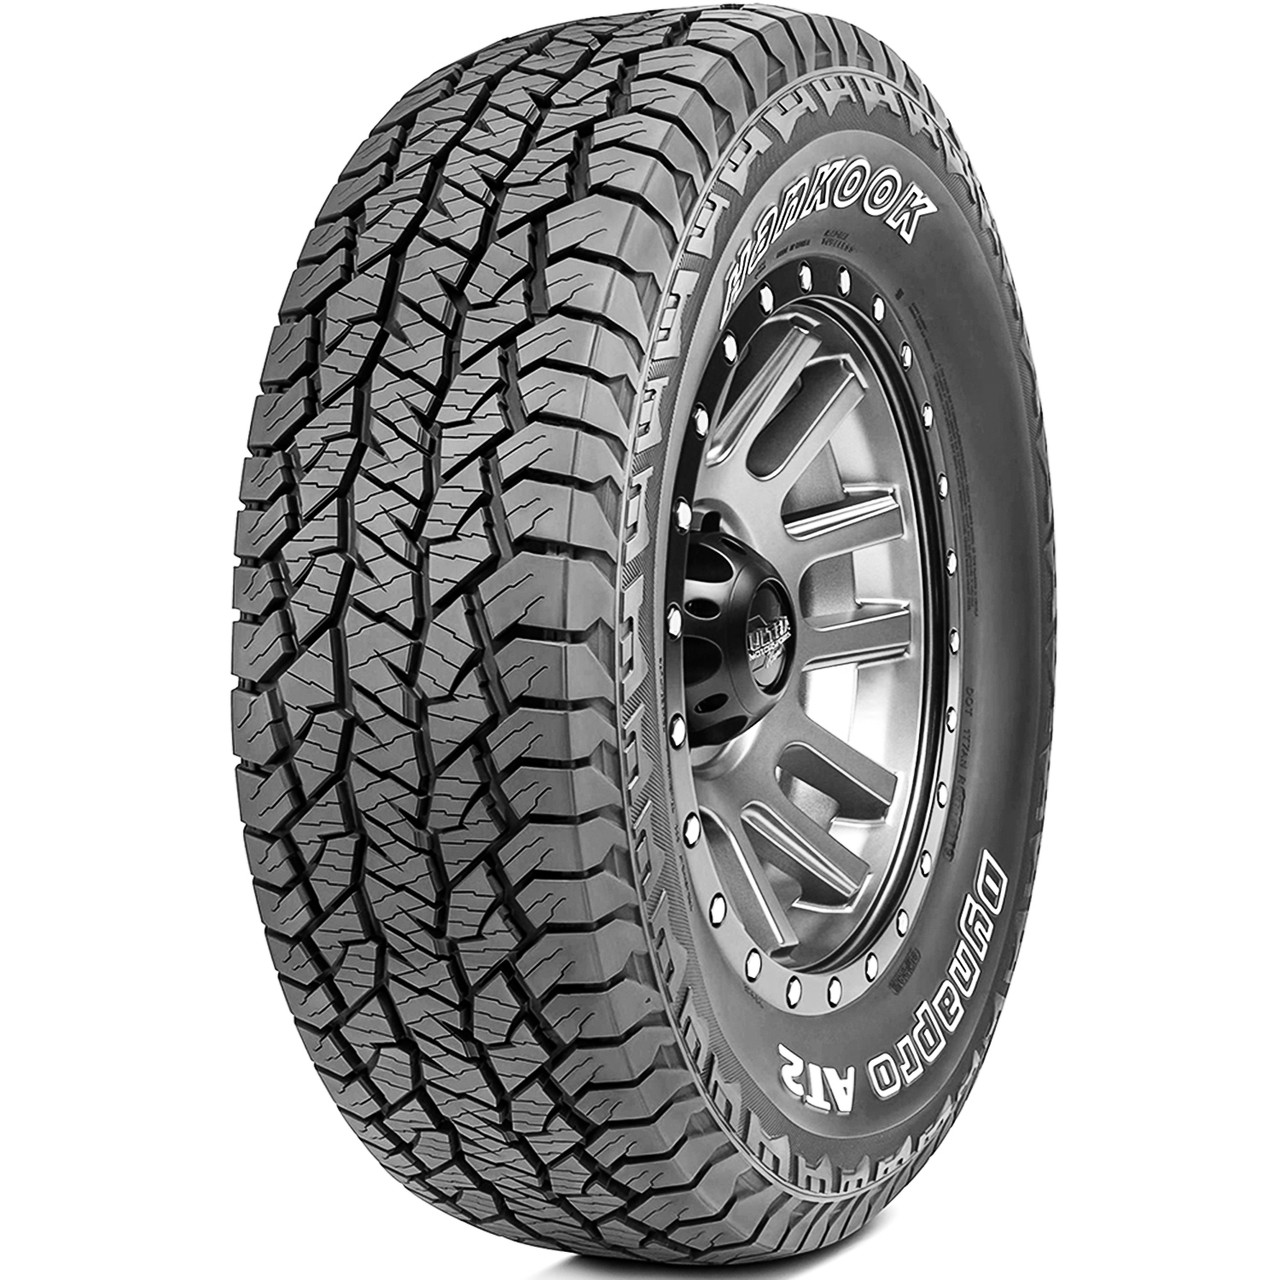 Photos - Motorcycle Tyre Hankook Dynapro AT2 265/70R16, All Season, All Terrain tires. 